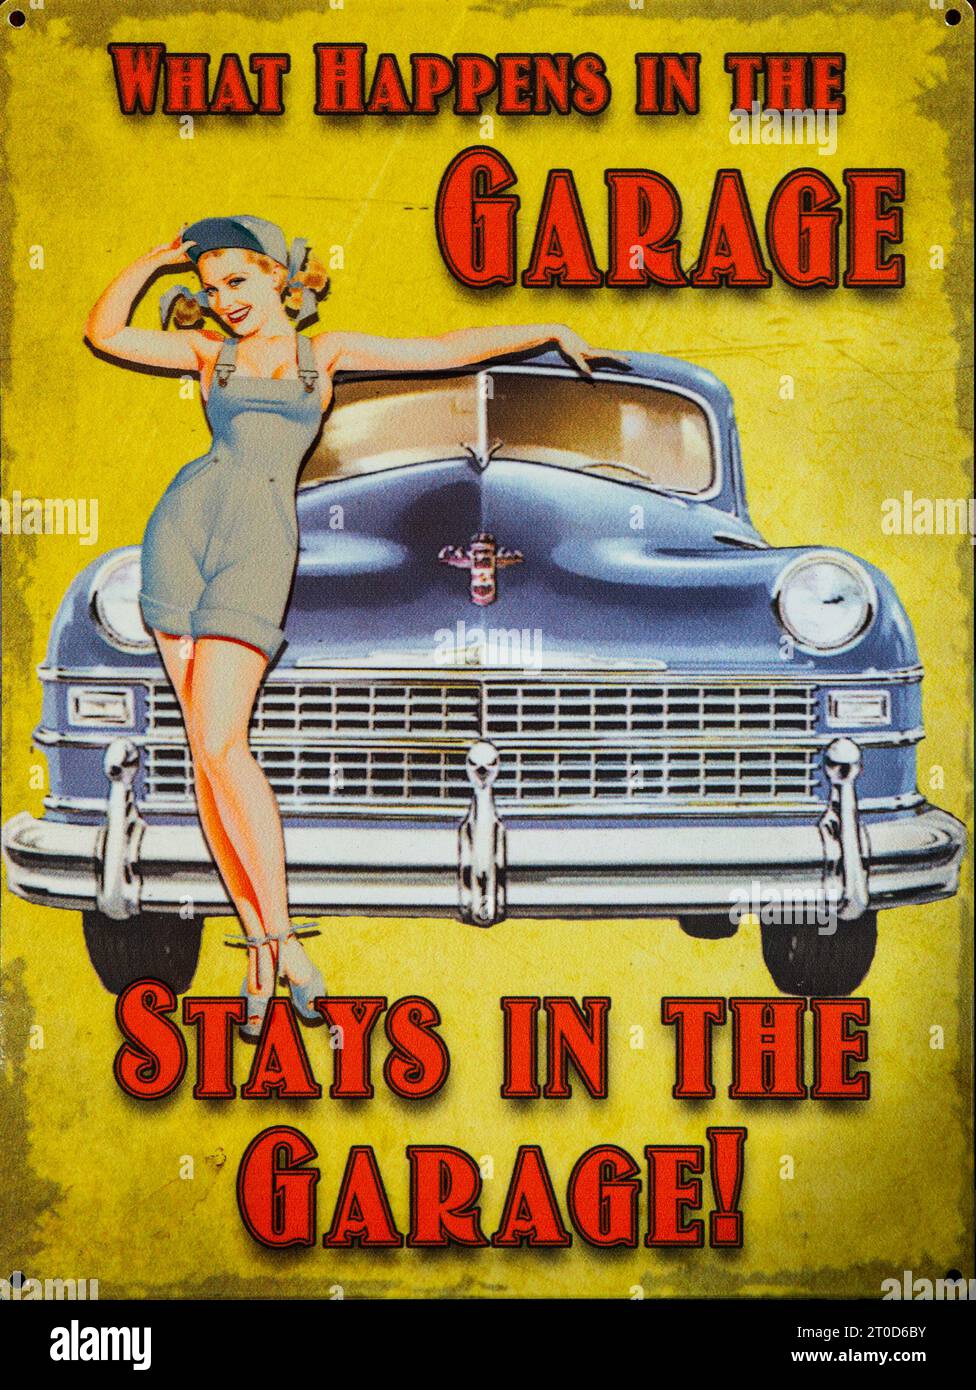 Old enamel sign 'What happens in the garage stays in the garage' woman posing by car Stock Photo